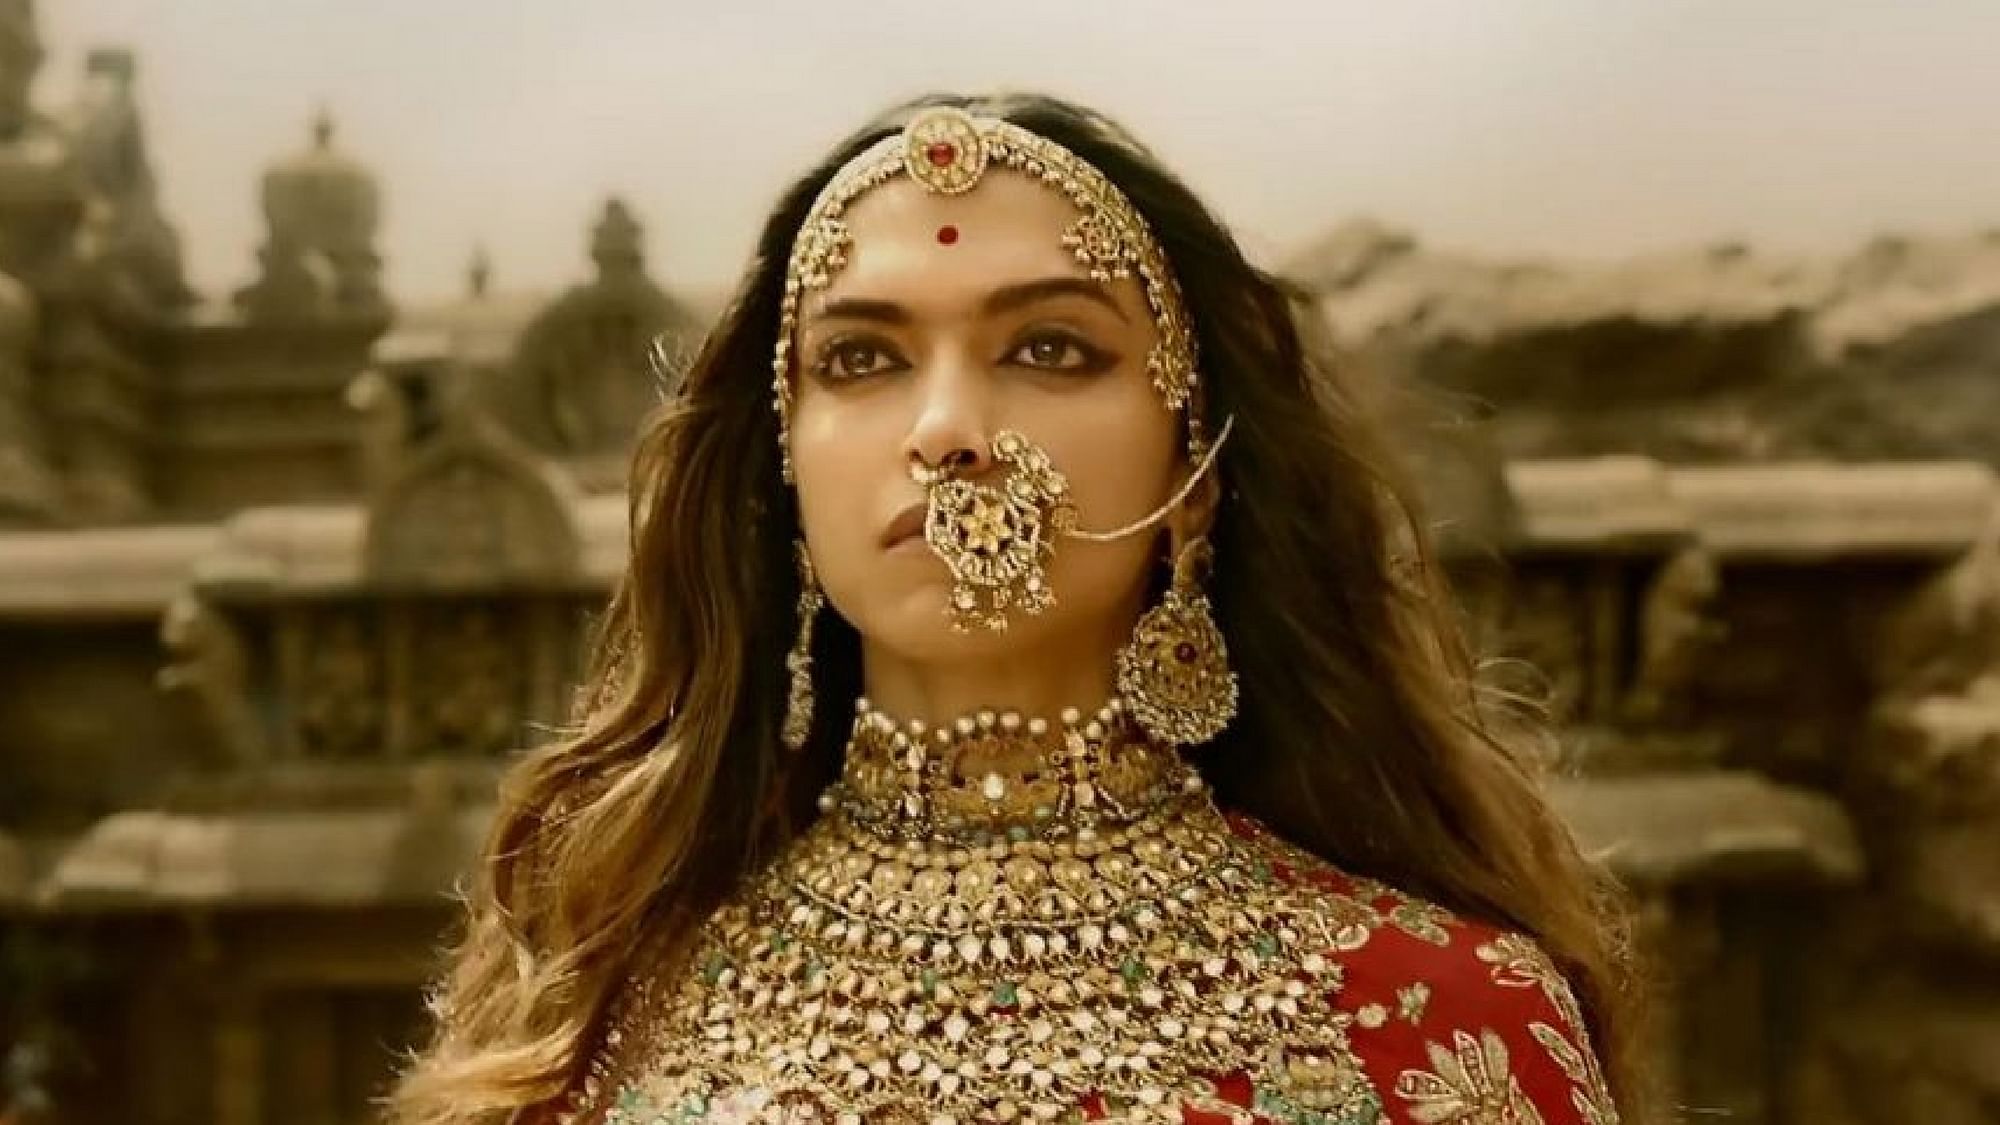 While on ONE hand, you claim to be fighting for “the honour of Padmavati”, on the other, you’ve been hurling abuses at Deepika Padukone and director Sanjay Leela Bhansali’s family.